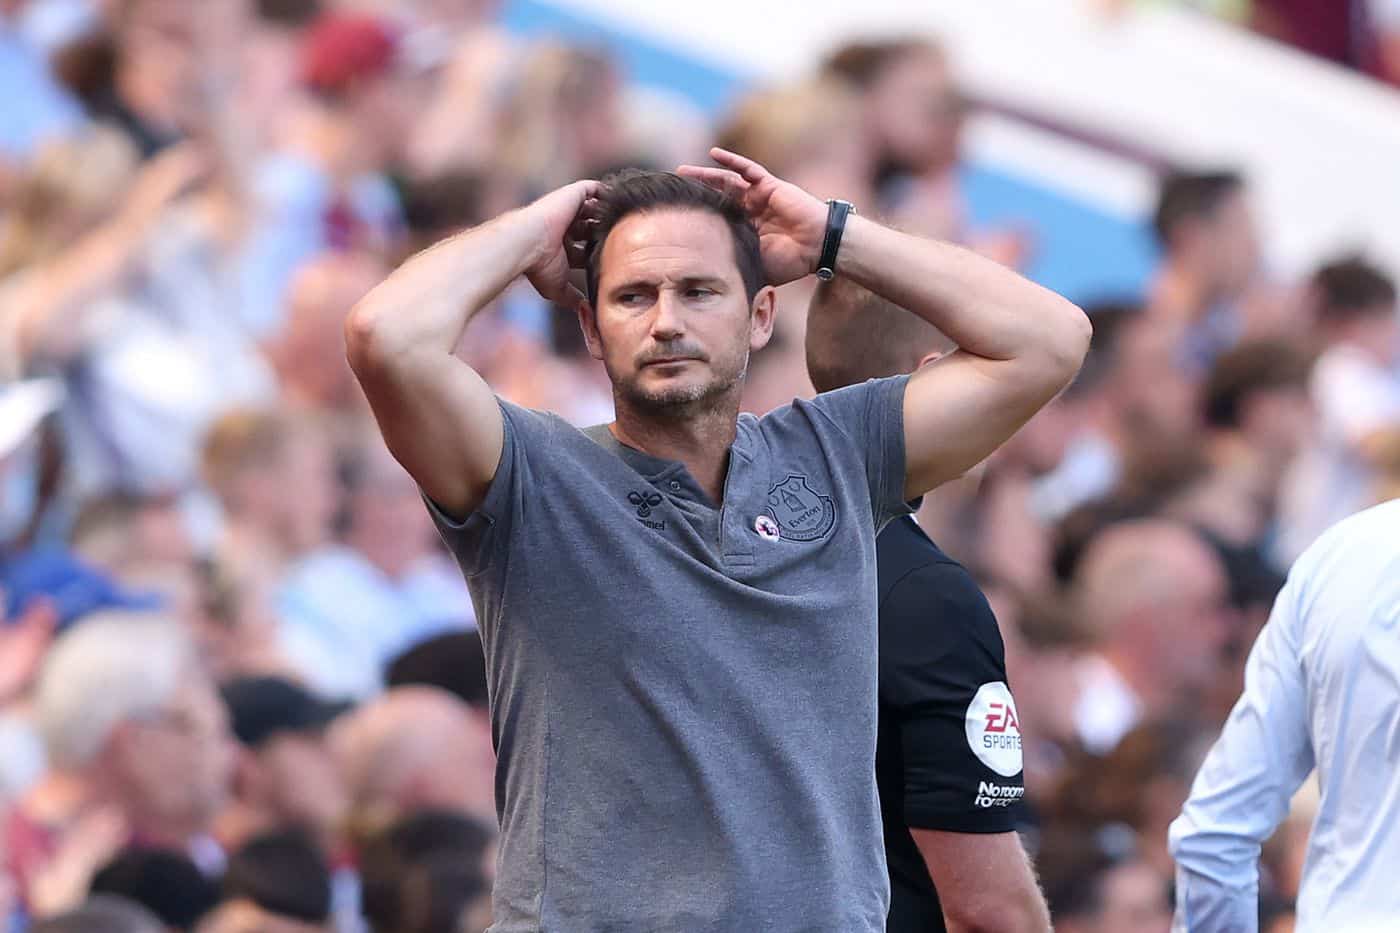 Lampard And Doucoure fall-out Explained: What's Really Going On At Everton?